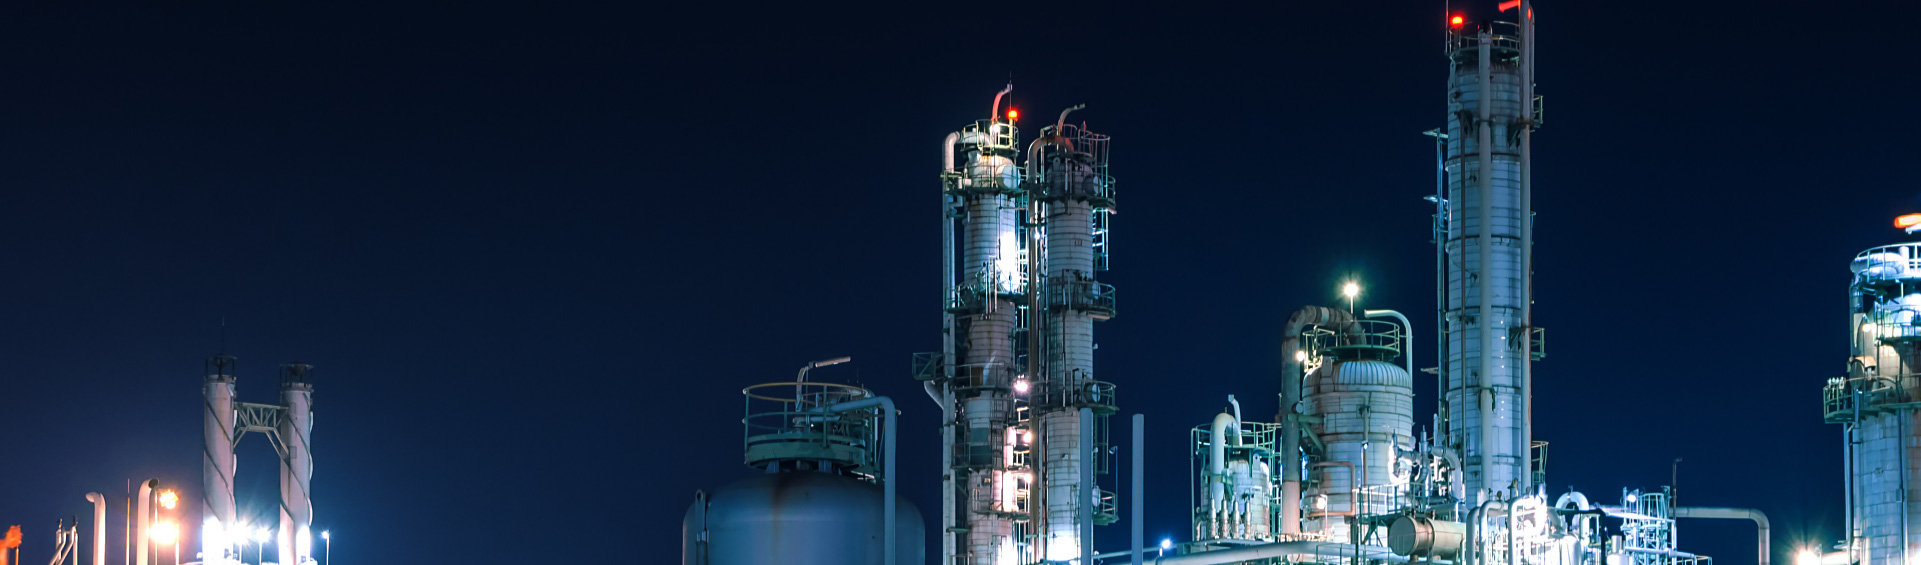 A Microwatt serviced oil and gas plant at night.